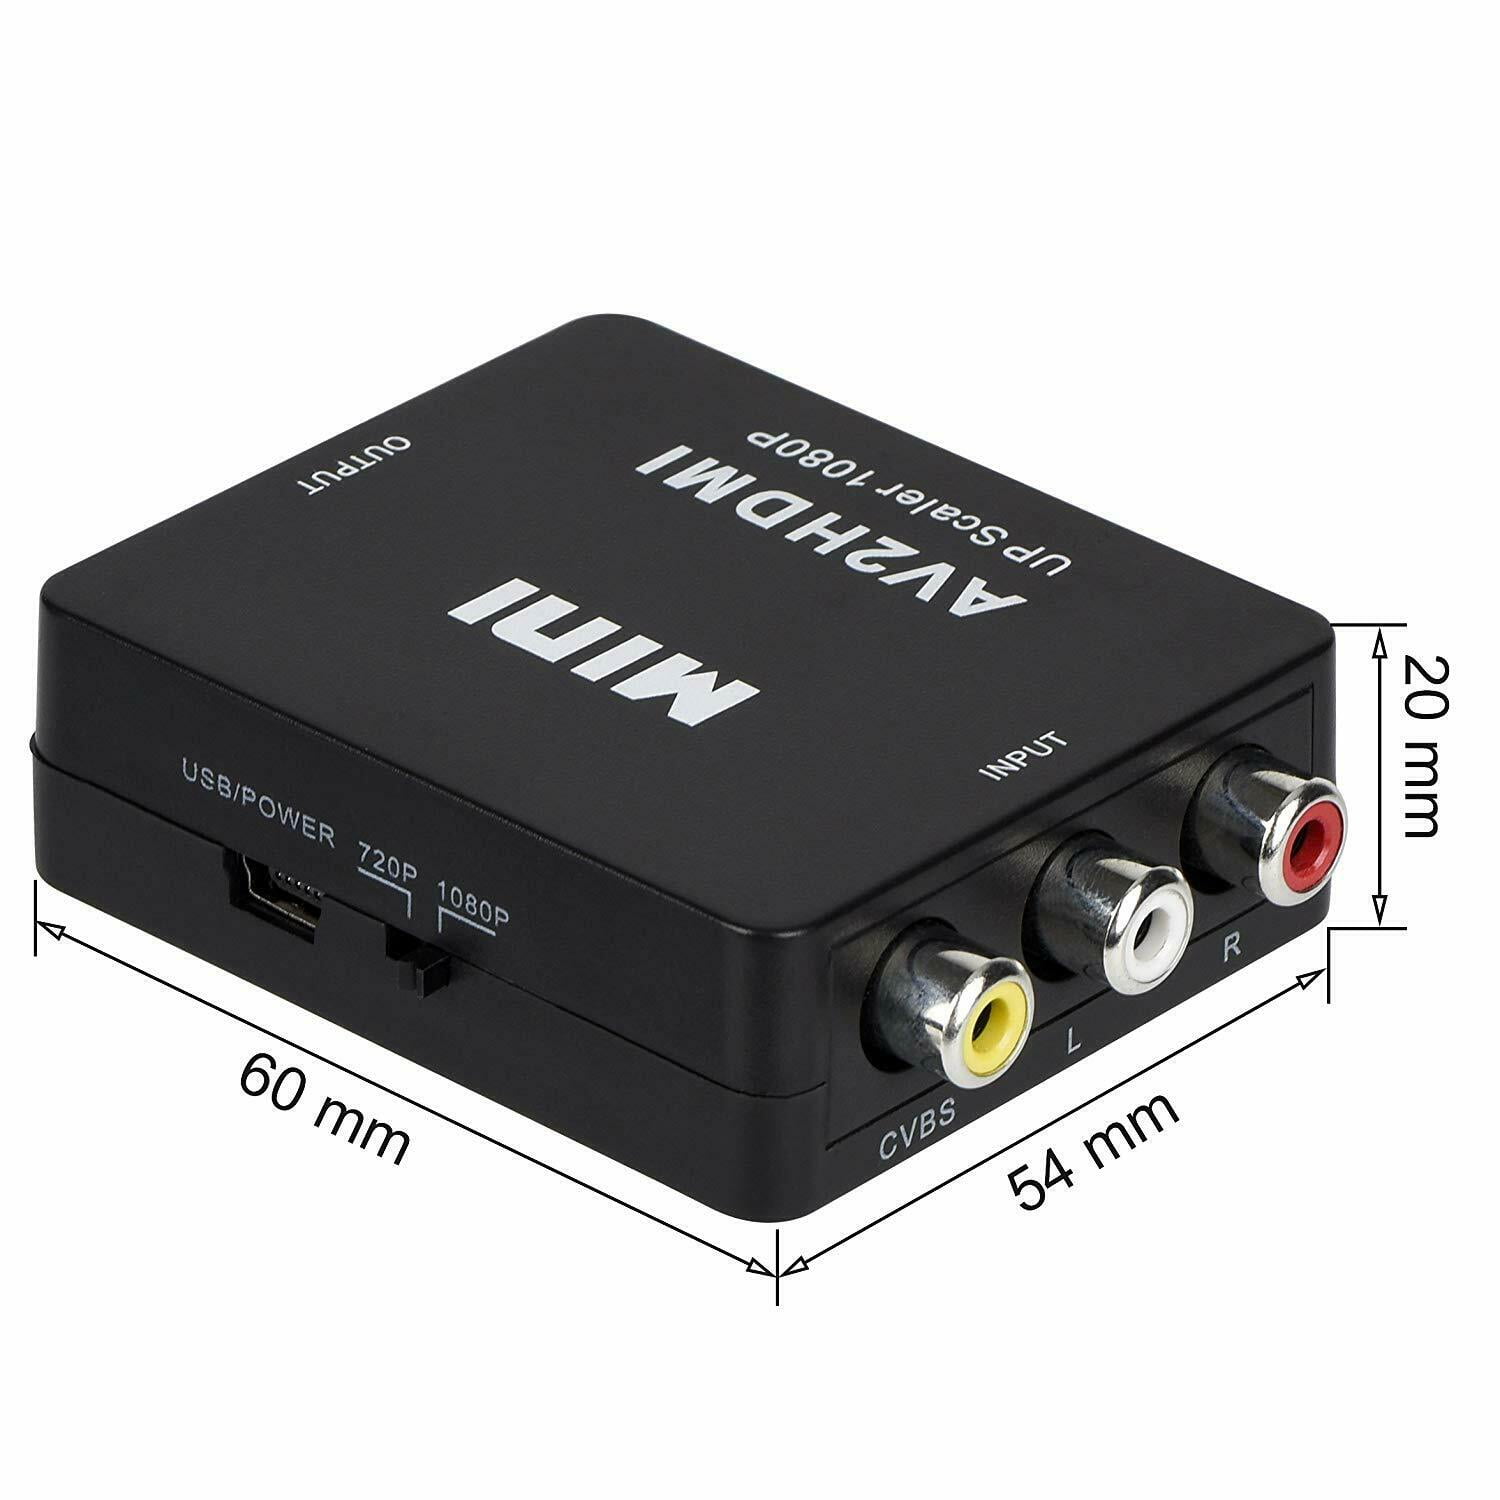 RCA to HDMI converter 1080P Mini RCA Composite CVBS to HDMI Video Audio Converter Adapter Supporting with USB Charge Cable for PC Laptop Xbox PS4 PS3 TV STB VHS VCR